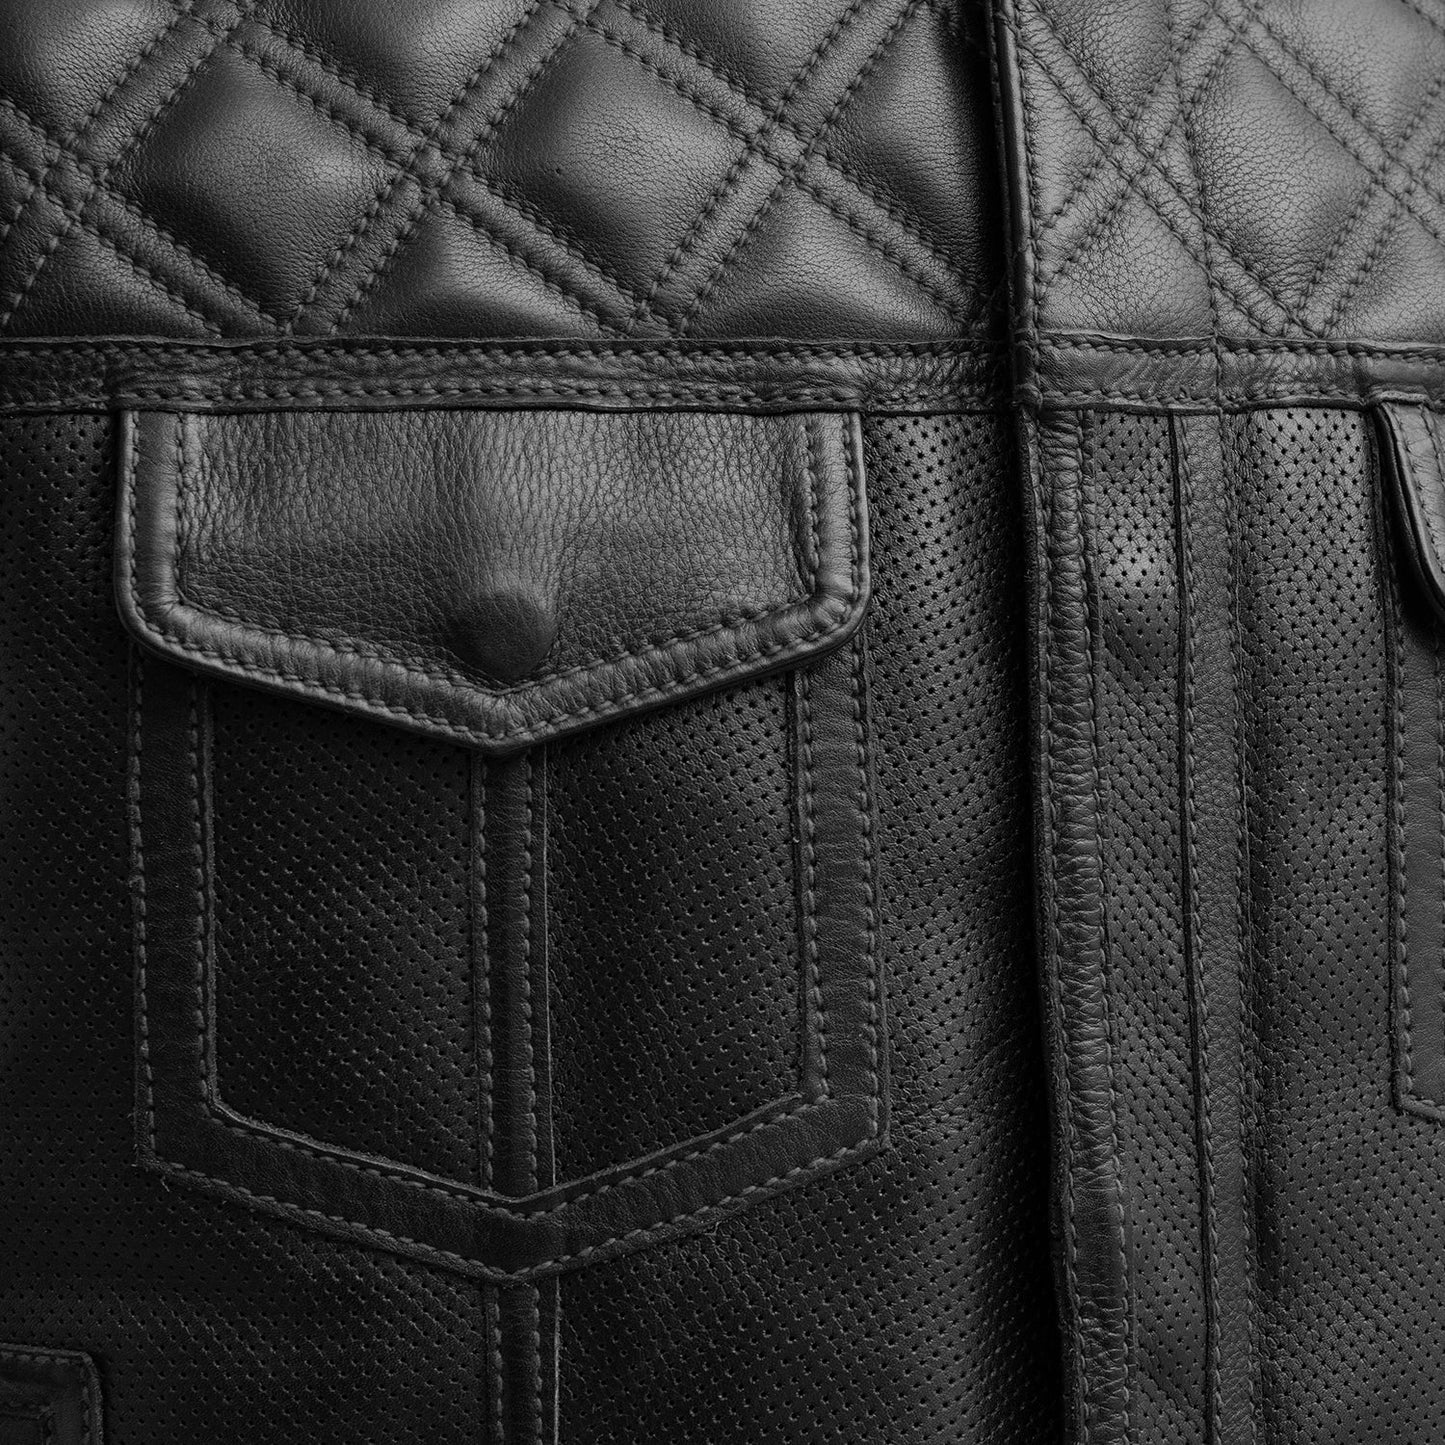 Upside Perforated Men's Club Style Leather Vest Men's Leather Vest First Manufacturing Company   